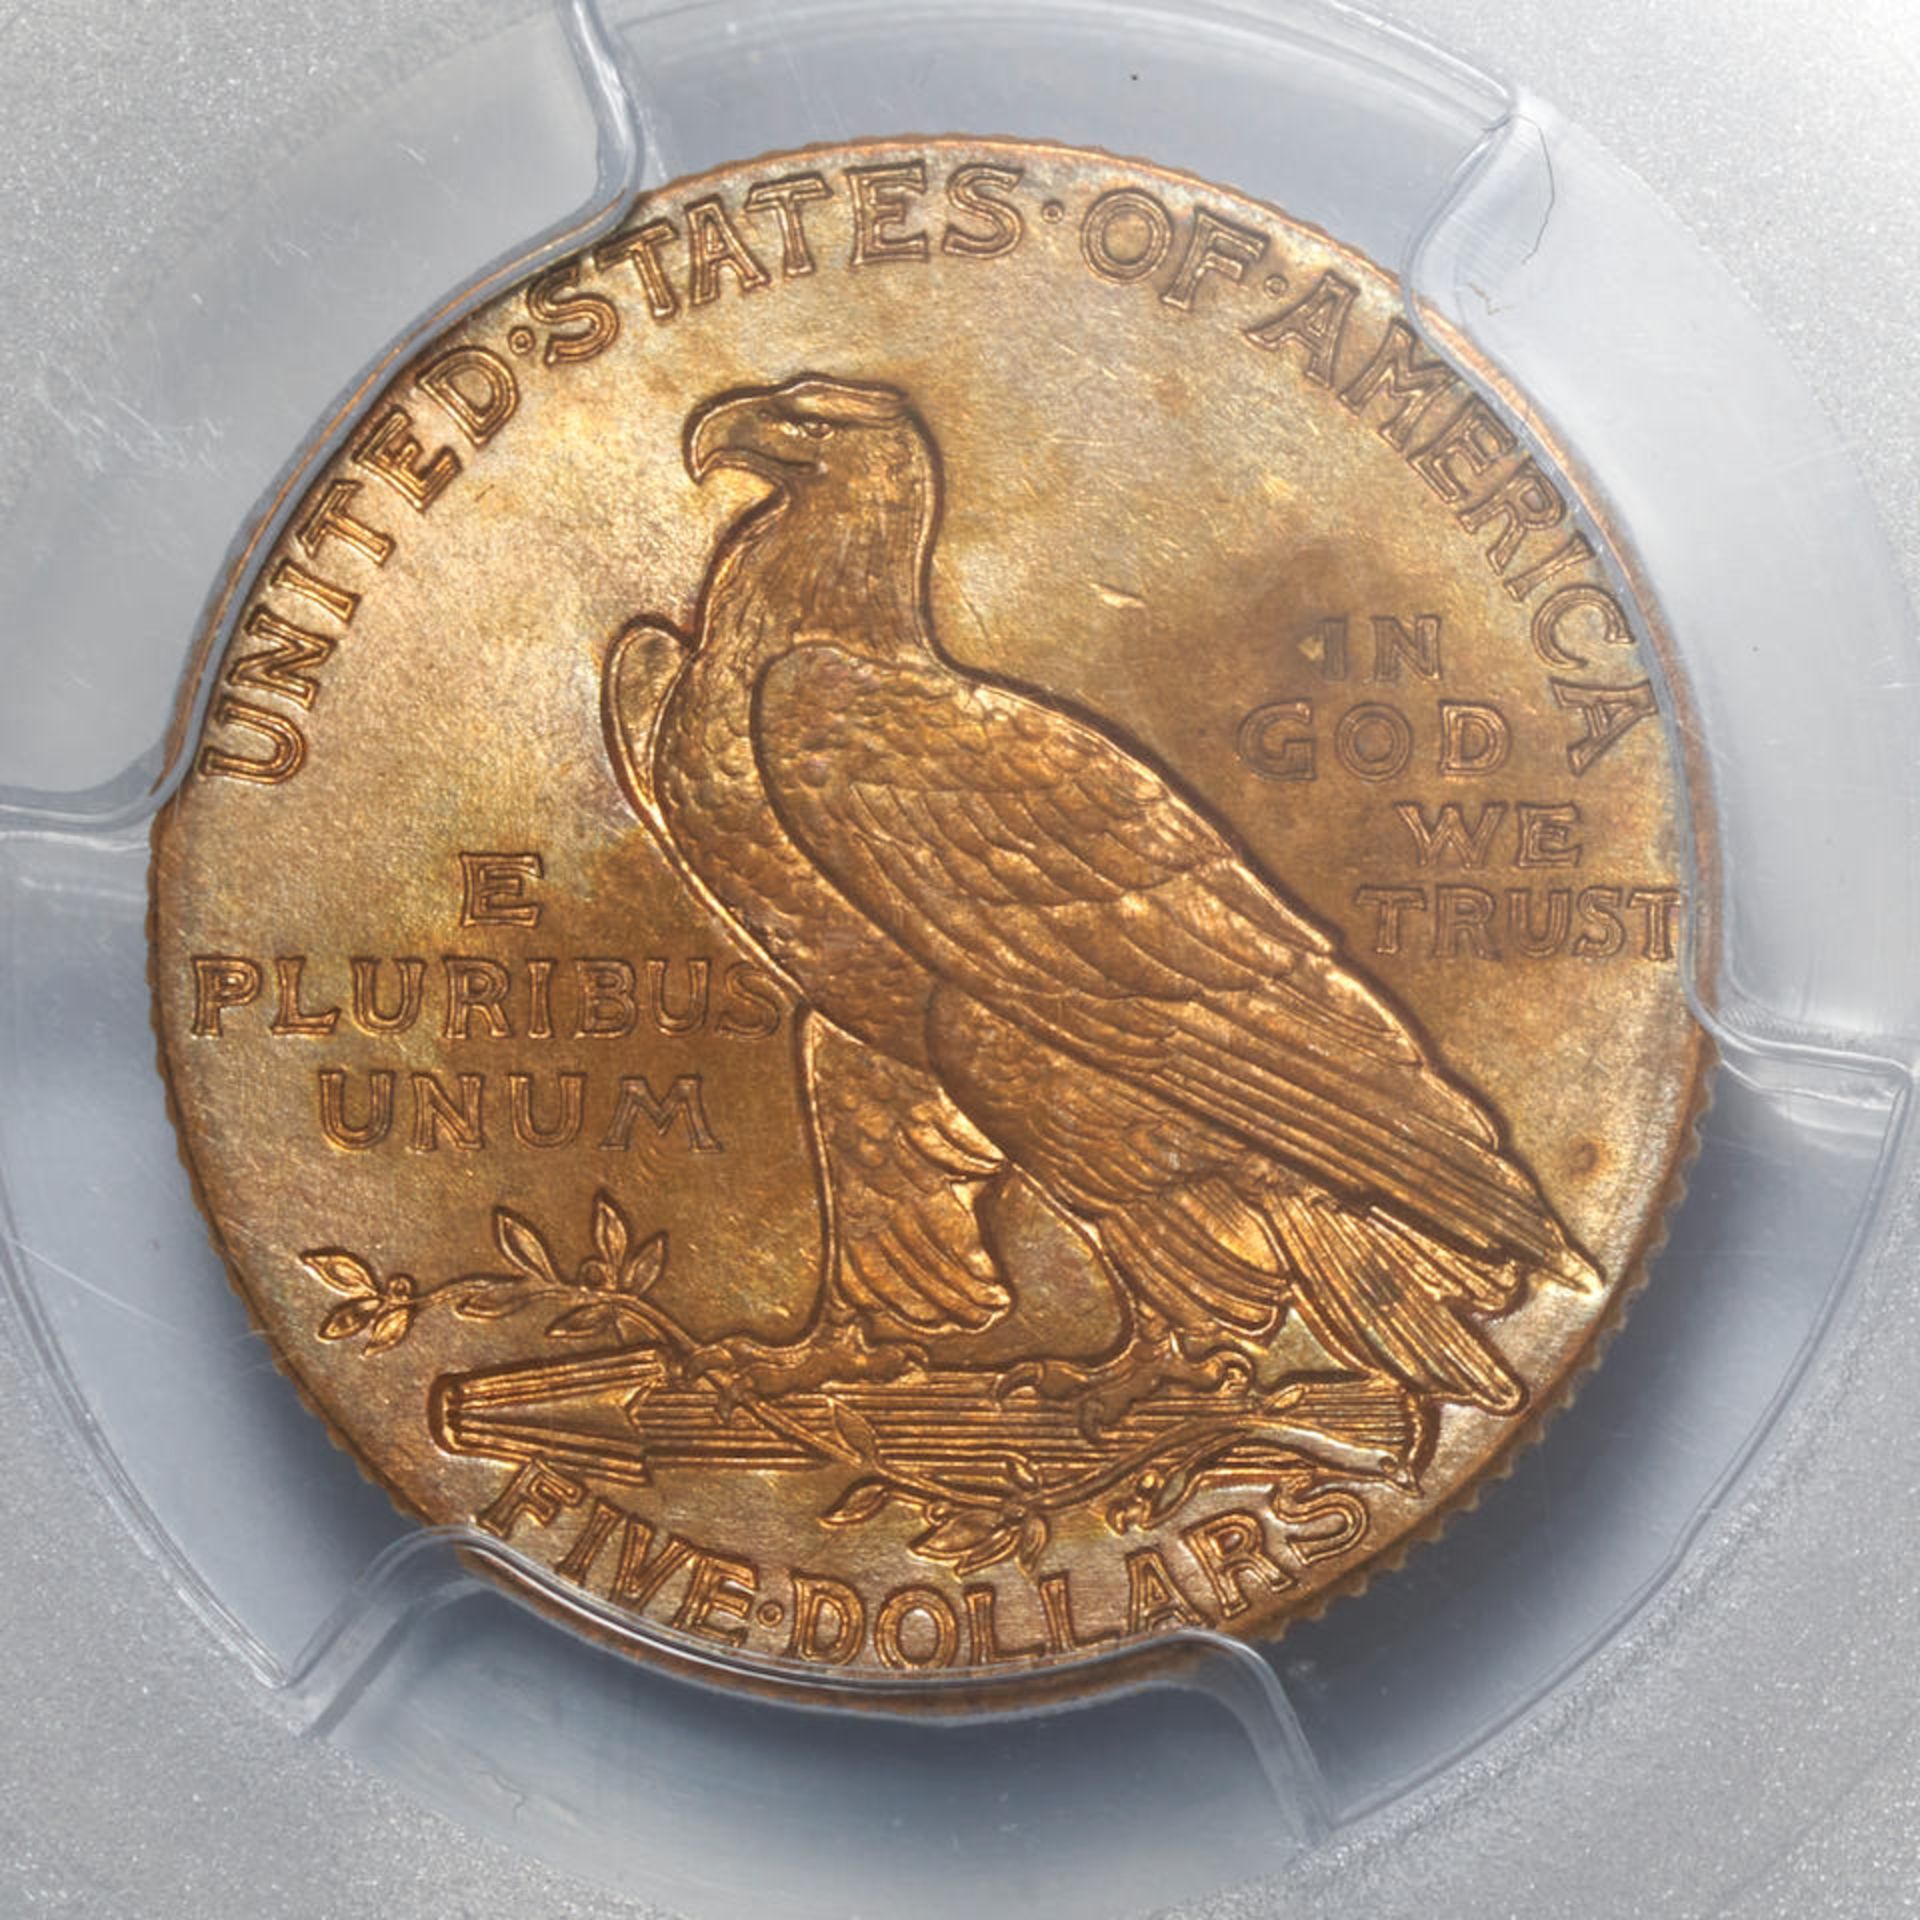 United States 1908 Indian Head $5 Half Eagle Gold Coin. - Image 2 of 3